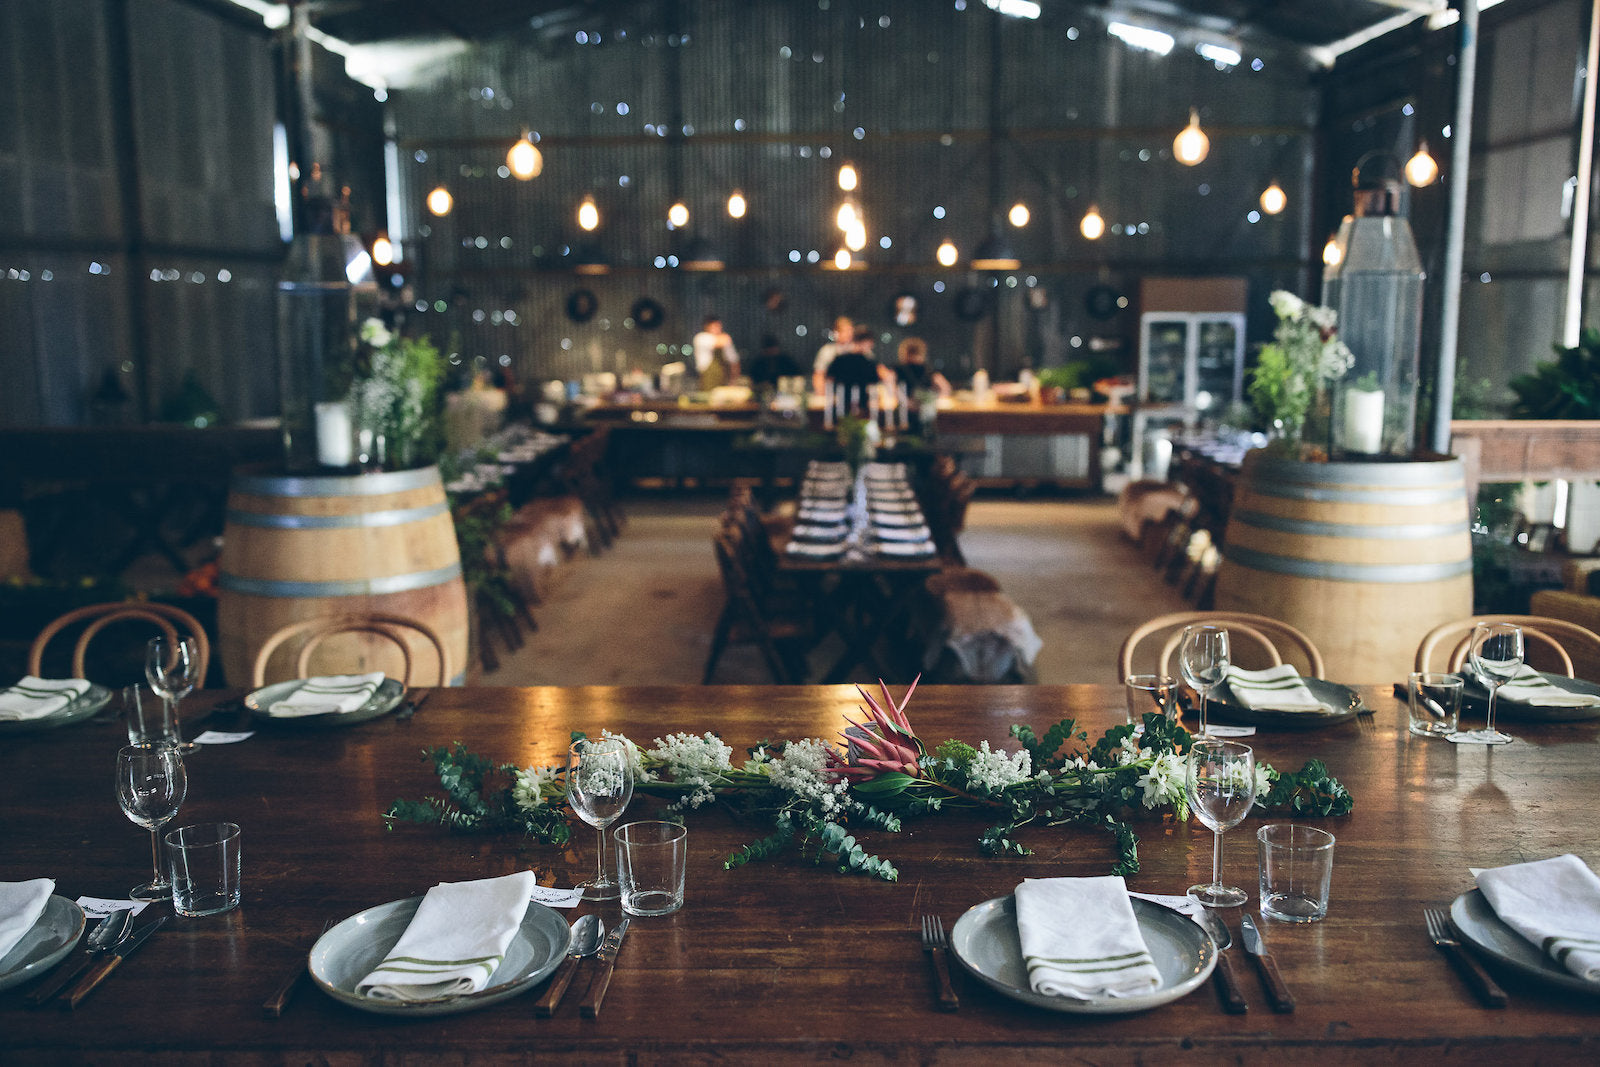 Inside shed table setting - image credit Willow and Co